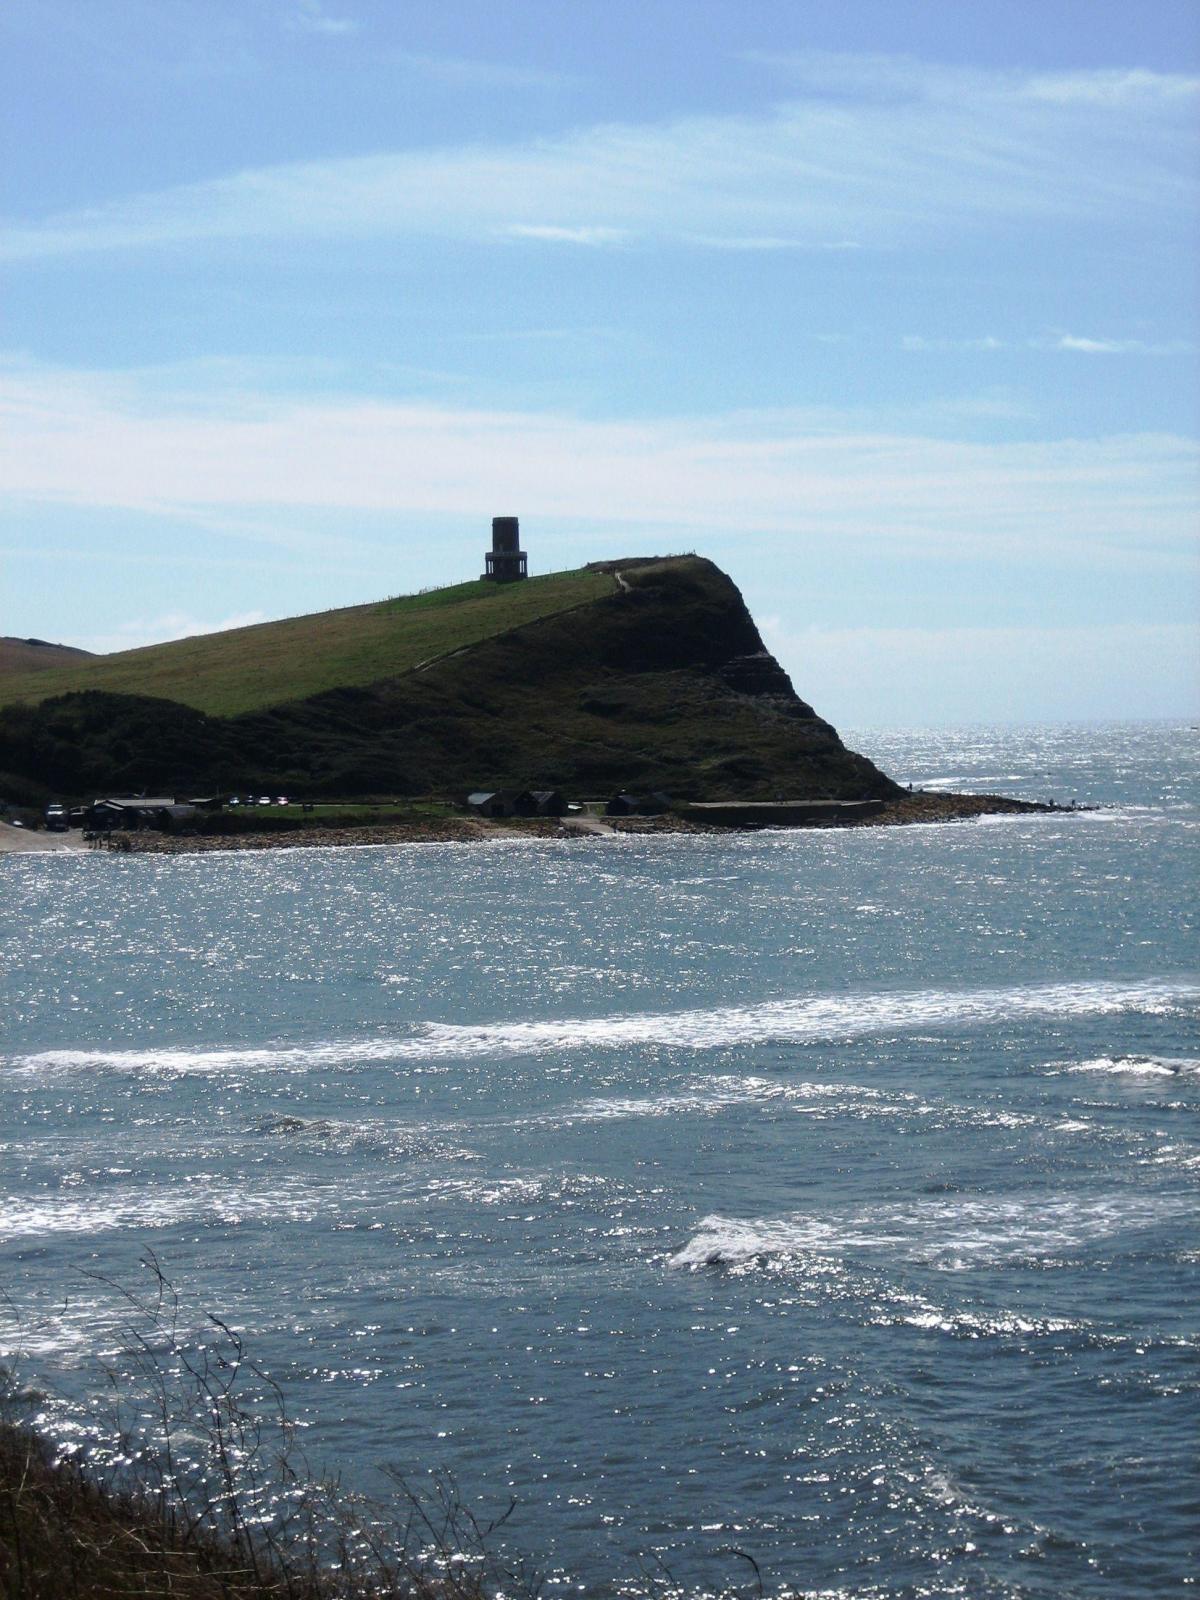 Pictures of Clavell Tower before and after it was rebuilt at Kimmeridge 